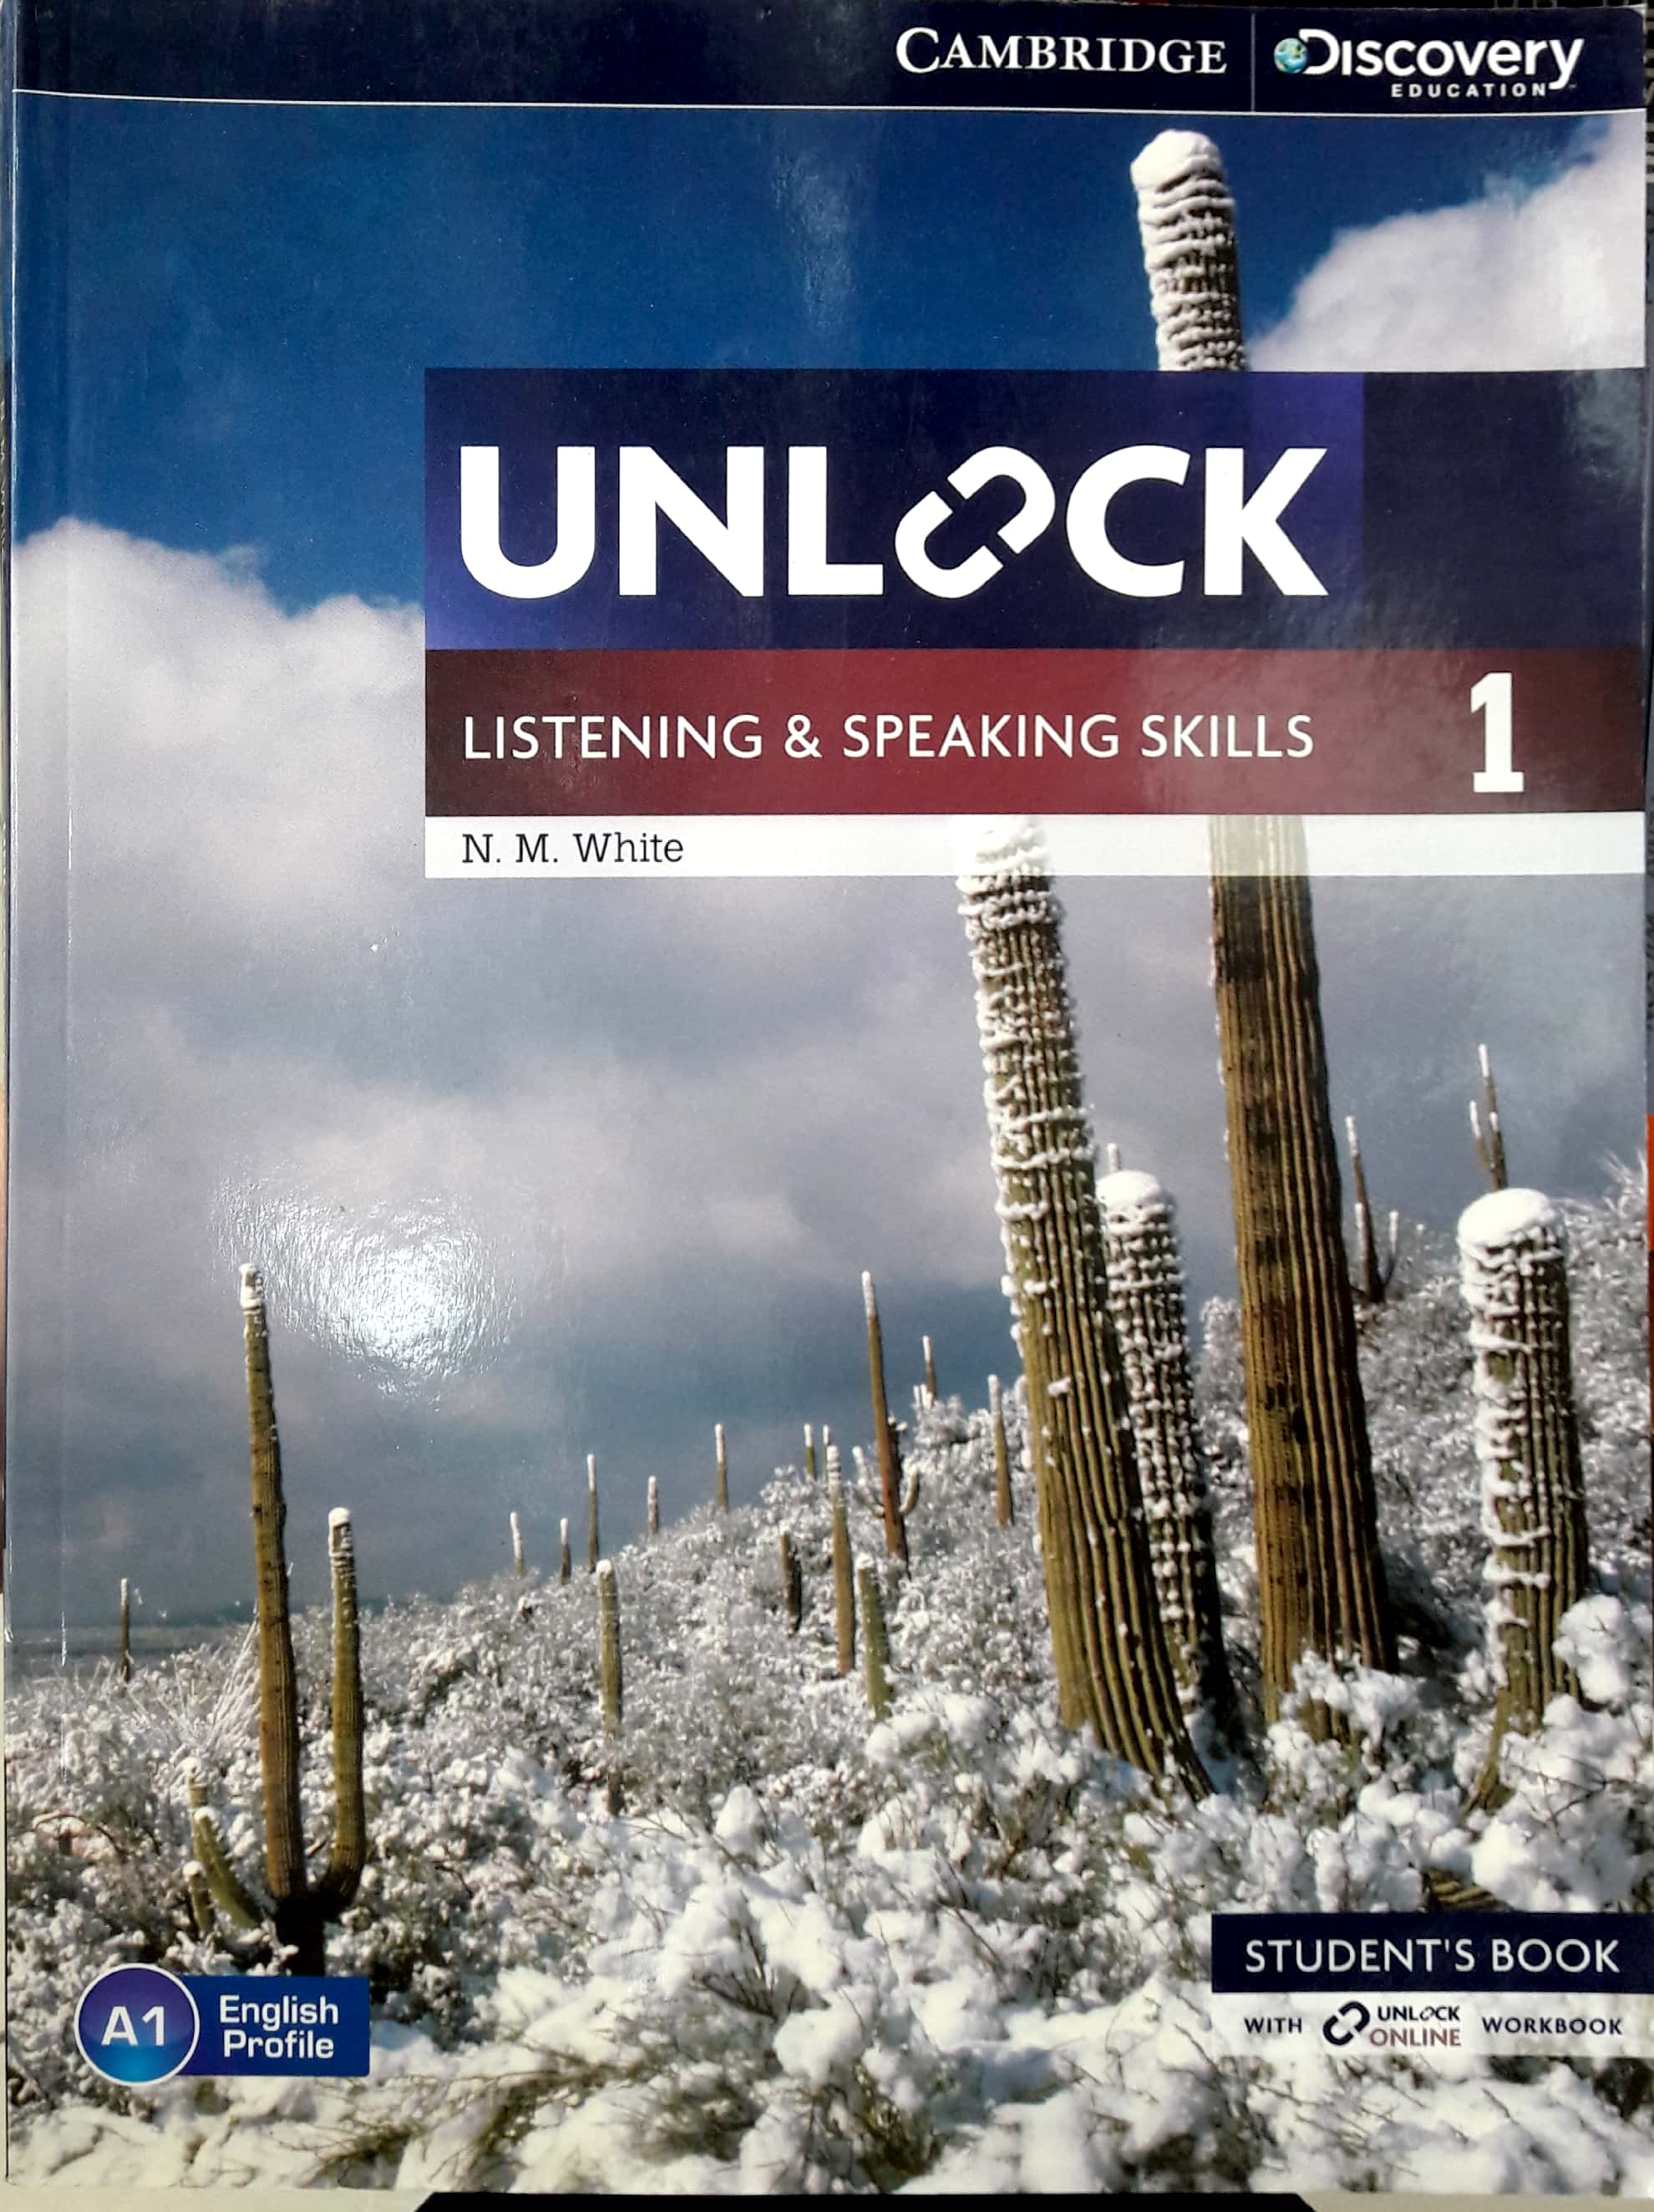 Unlock Level 1 Listening and Speaking Skills Student's Book and Online Workbook: Level 1